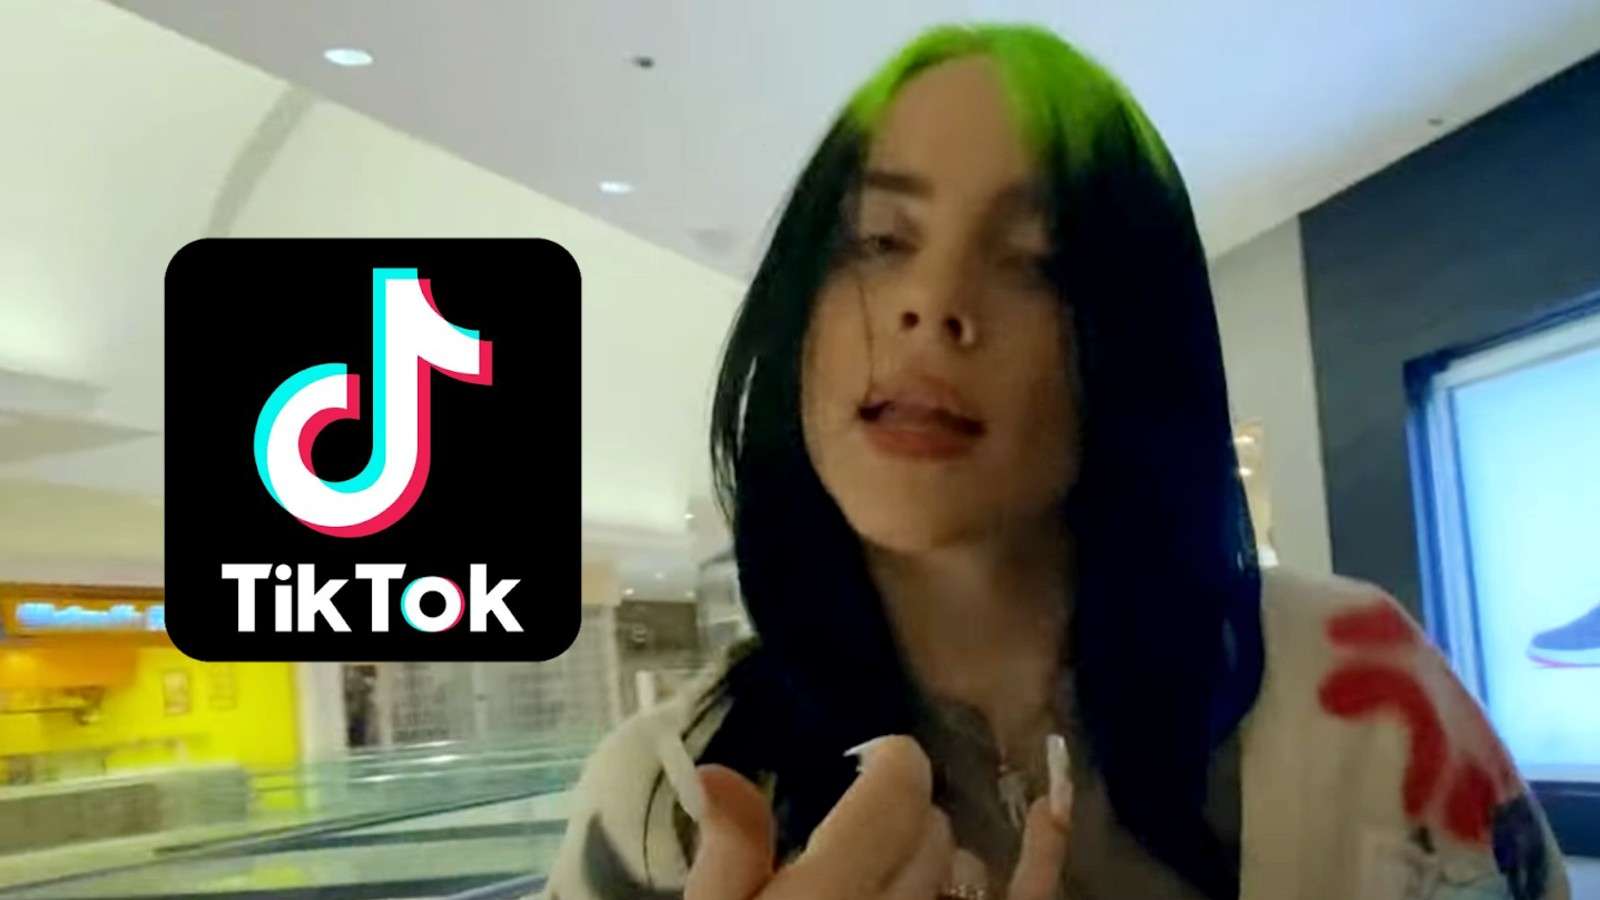 Billie Eilish looks at the camera in the Therfore I Am music video, next o the TikTok logo